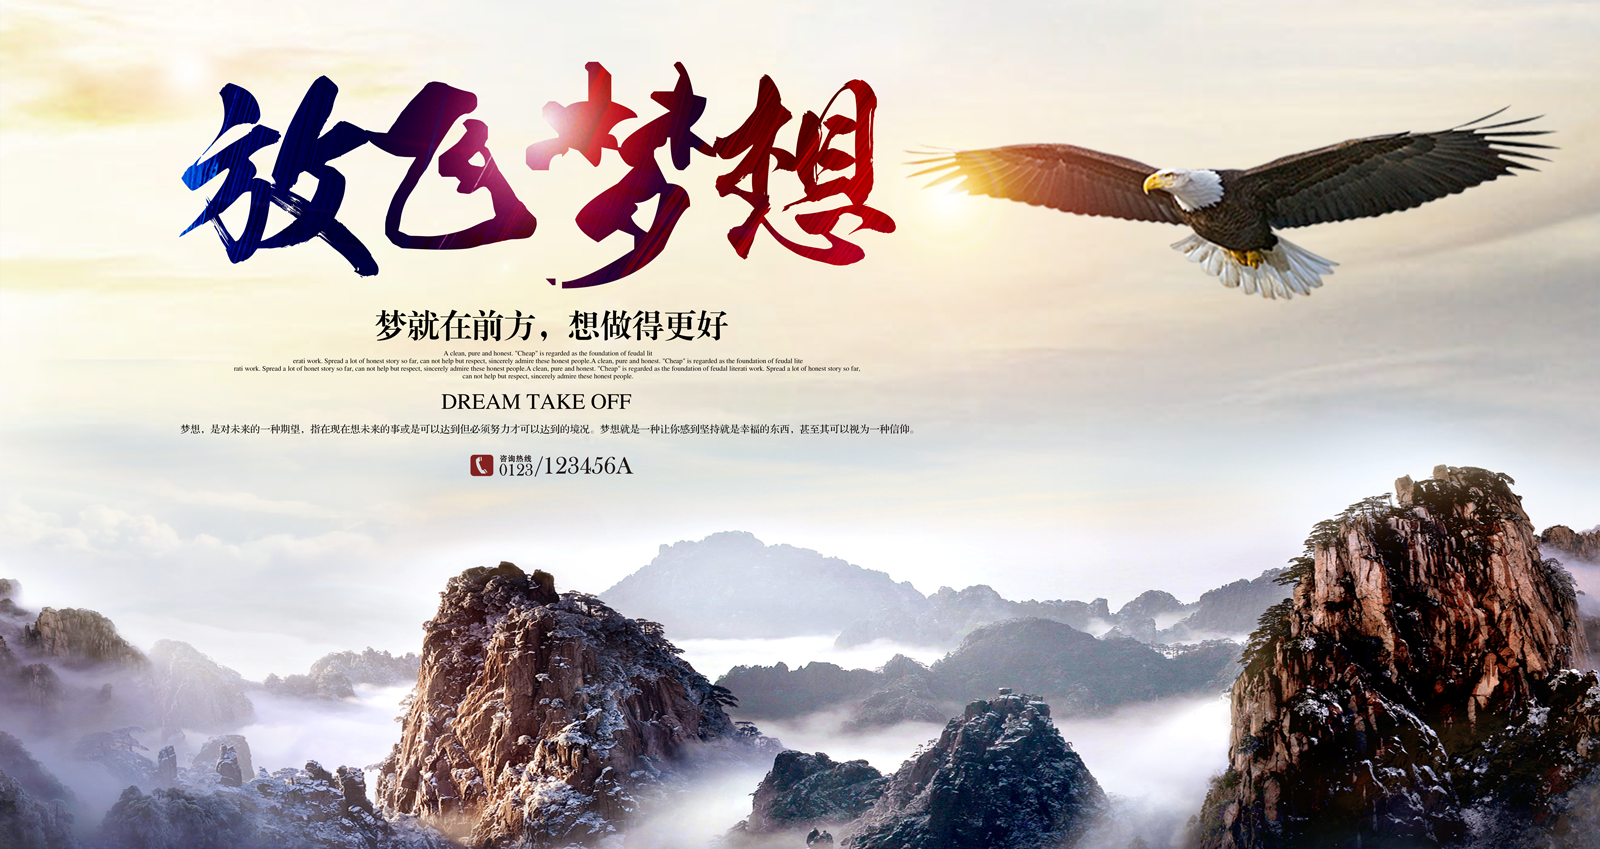 Flying dream corporate culture poster design PSD File Free Download